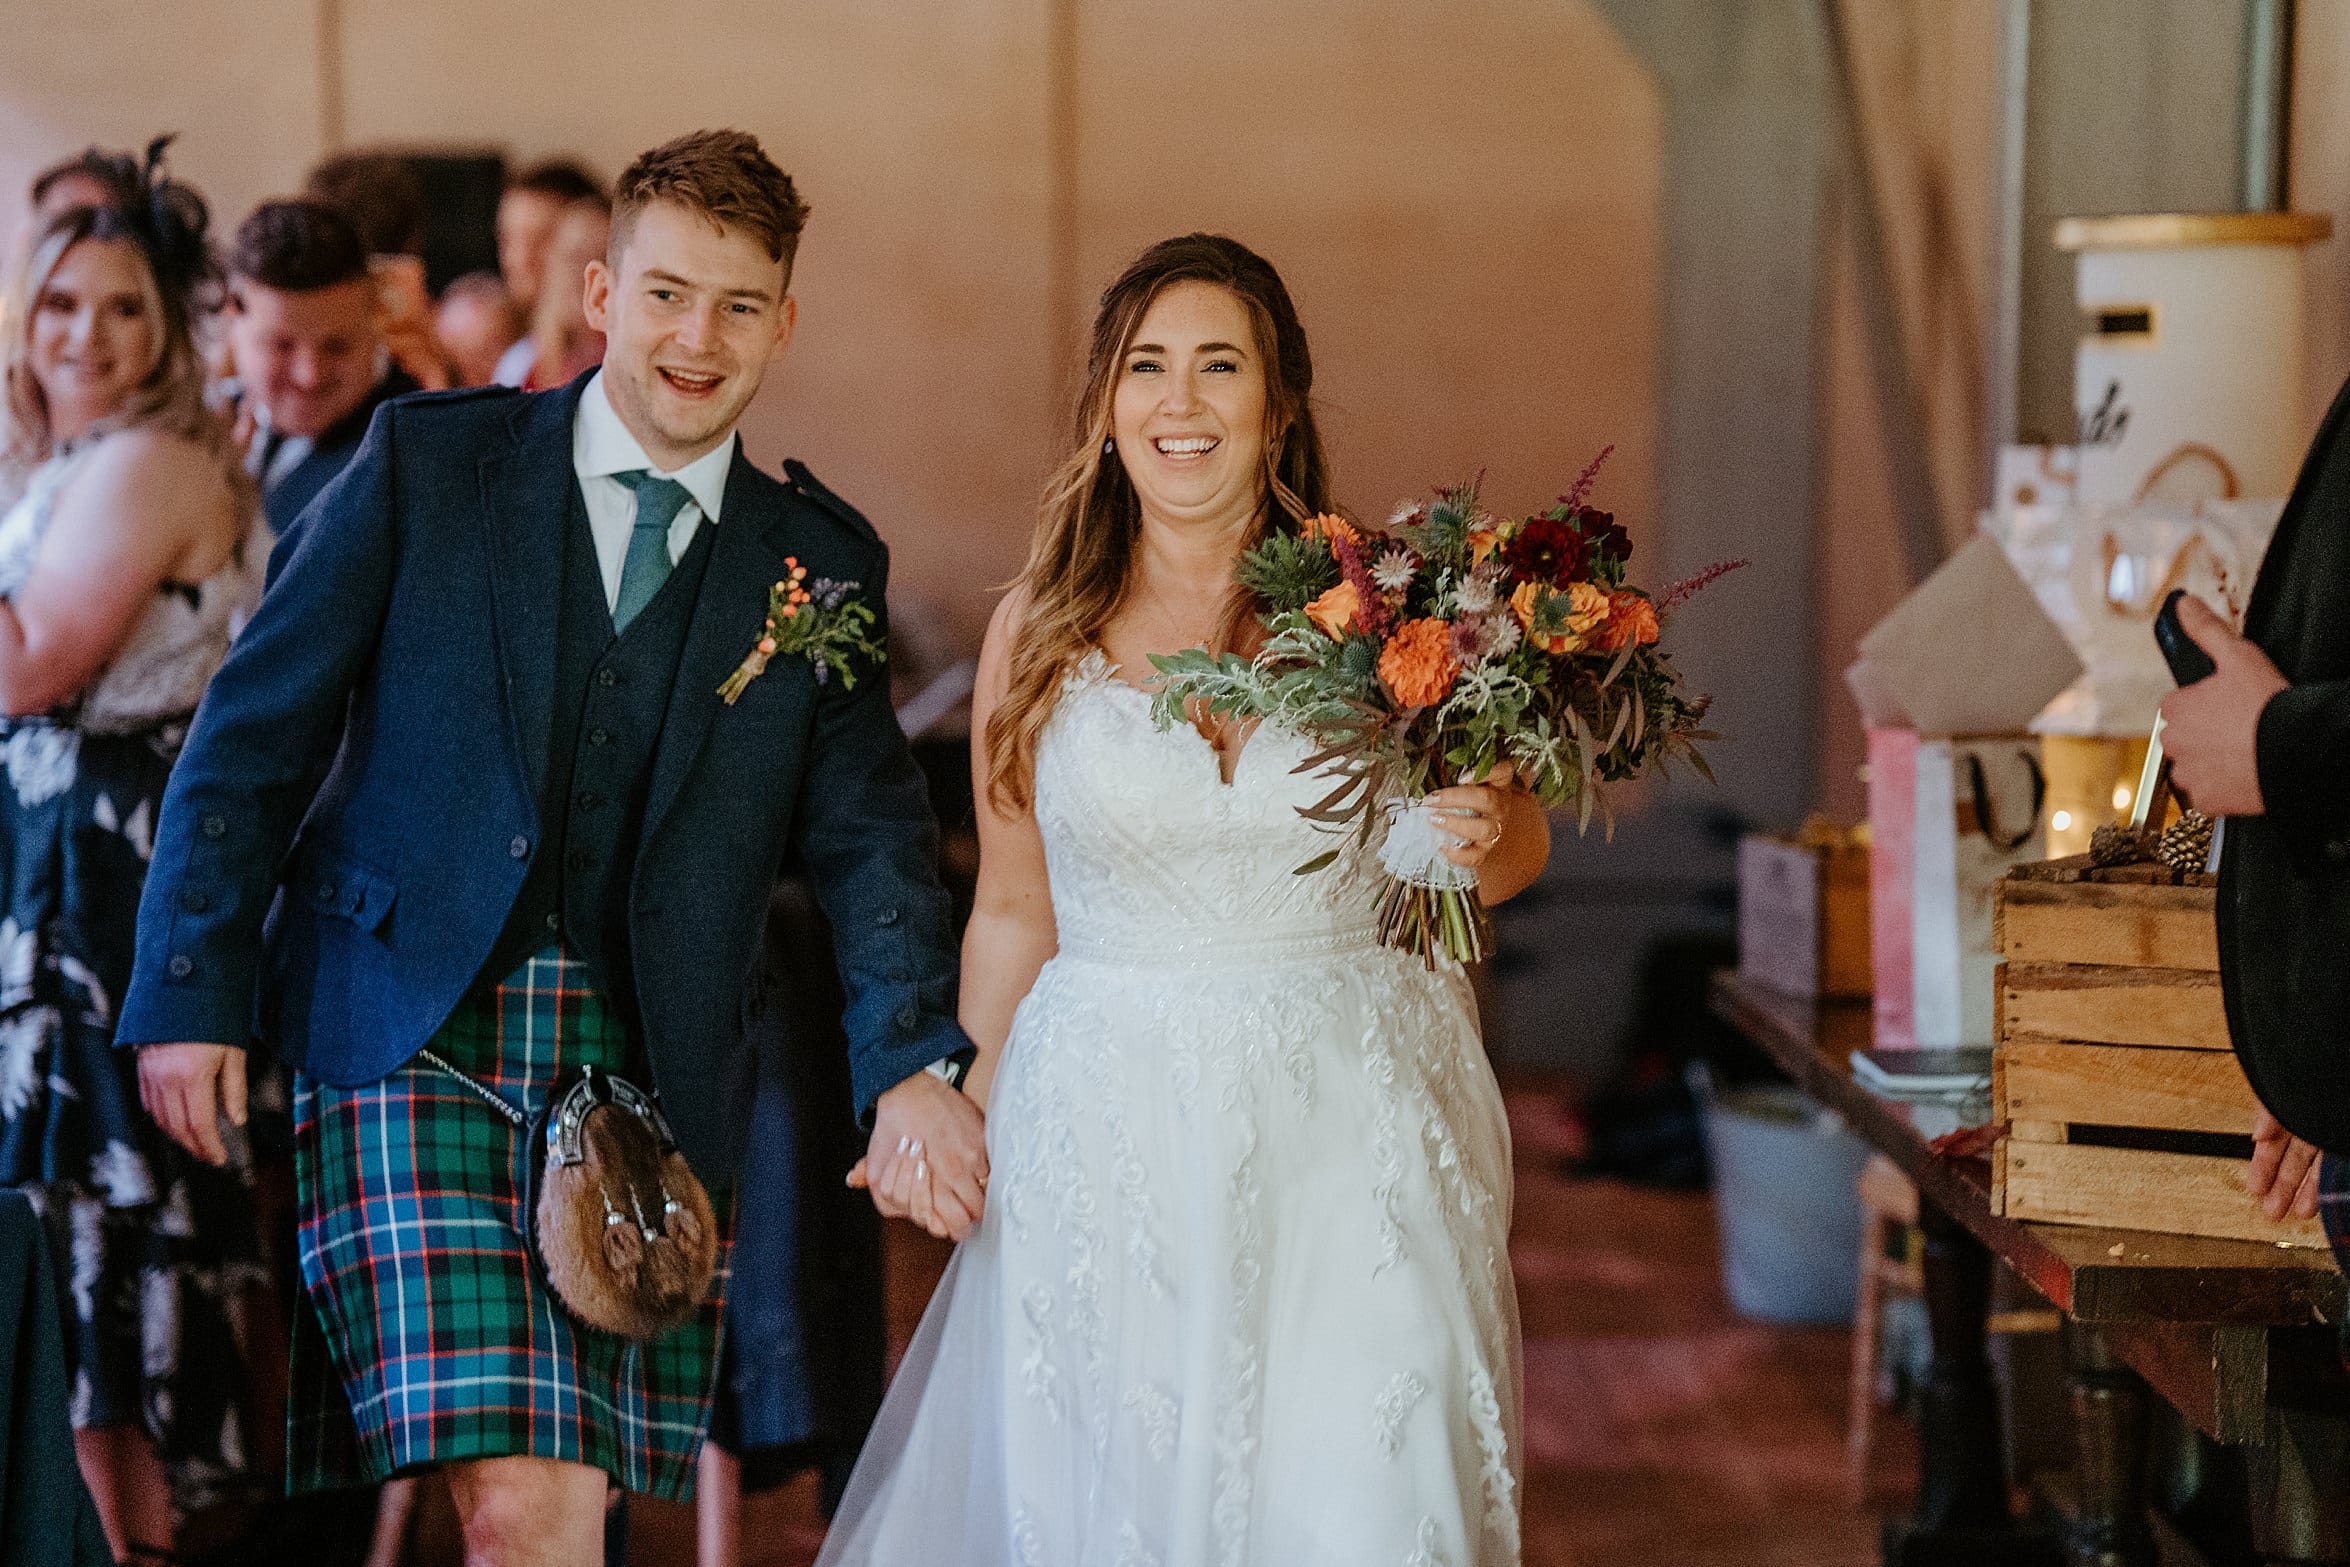 bride in white dress and groom wearing kilt outfit walking hand in hand as they enter the reception in marquee duntarvie castle wedding